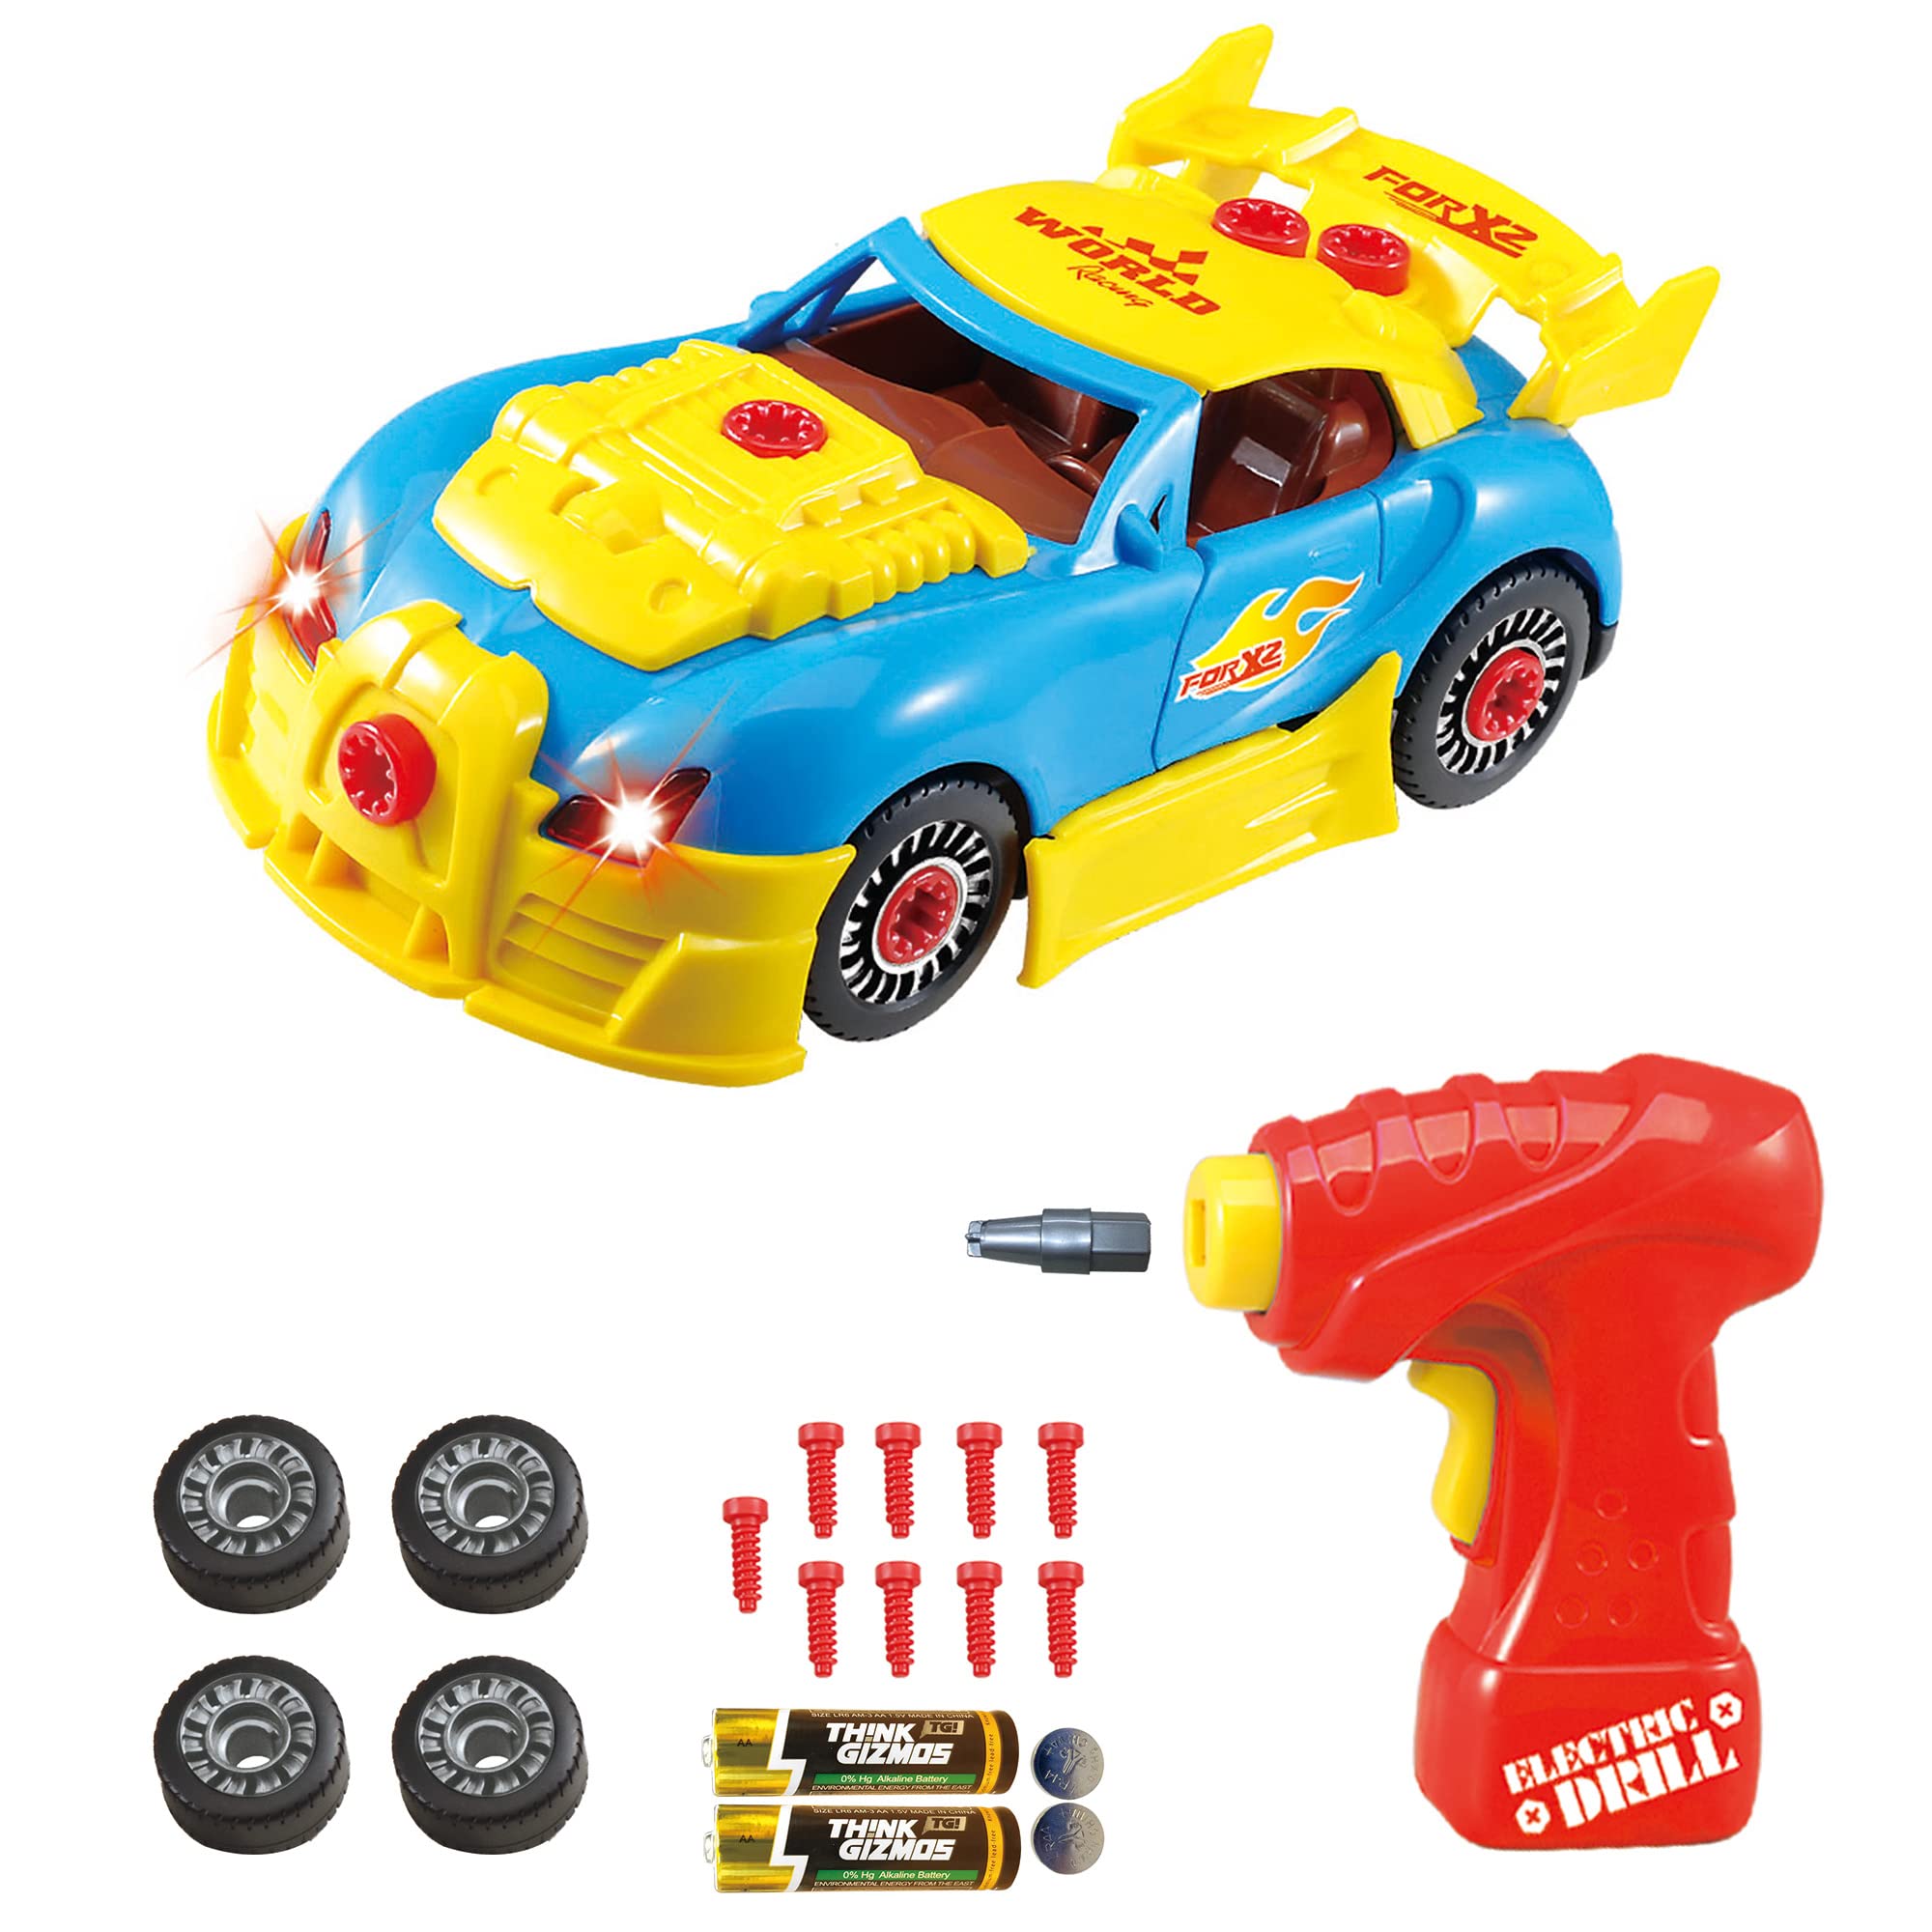 Think Gizmos Take Apart Toy Car For 3 4 5 Year Old Boys & Girls – Fun Toy With Working Drill - Build Your Own Car Kit STEM Toy - Realistic Engine Sounds & Lights